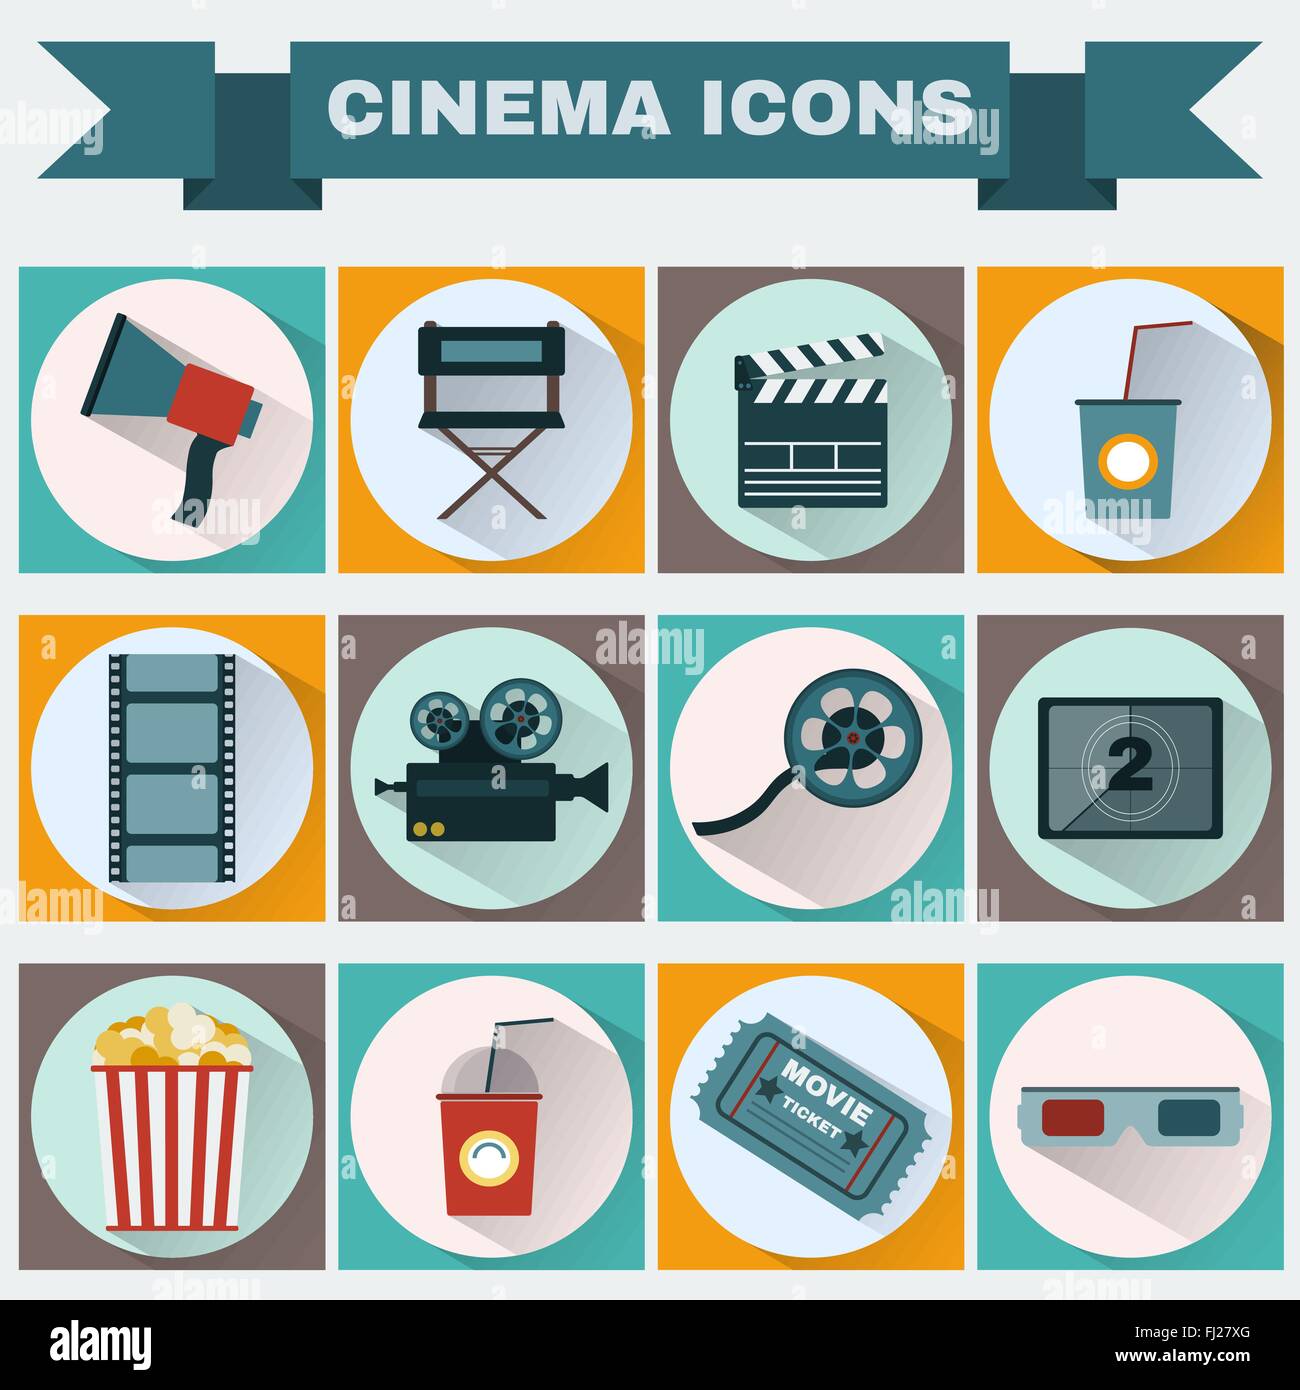 Cinema icon set. Making Movie. Camera, Movie  Ticket, Clapper board, Director's Seat, Loudhailer, Cocktail glass with tube. Stock Vector